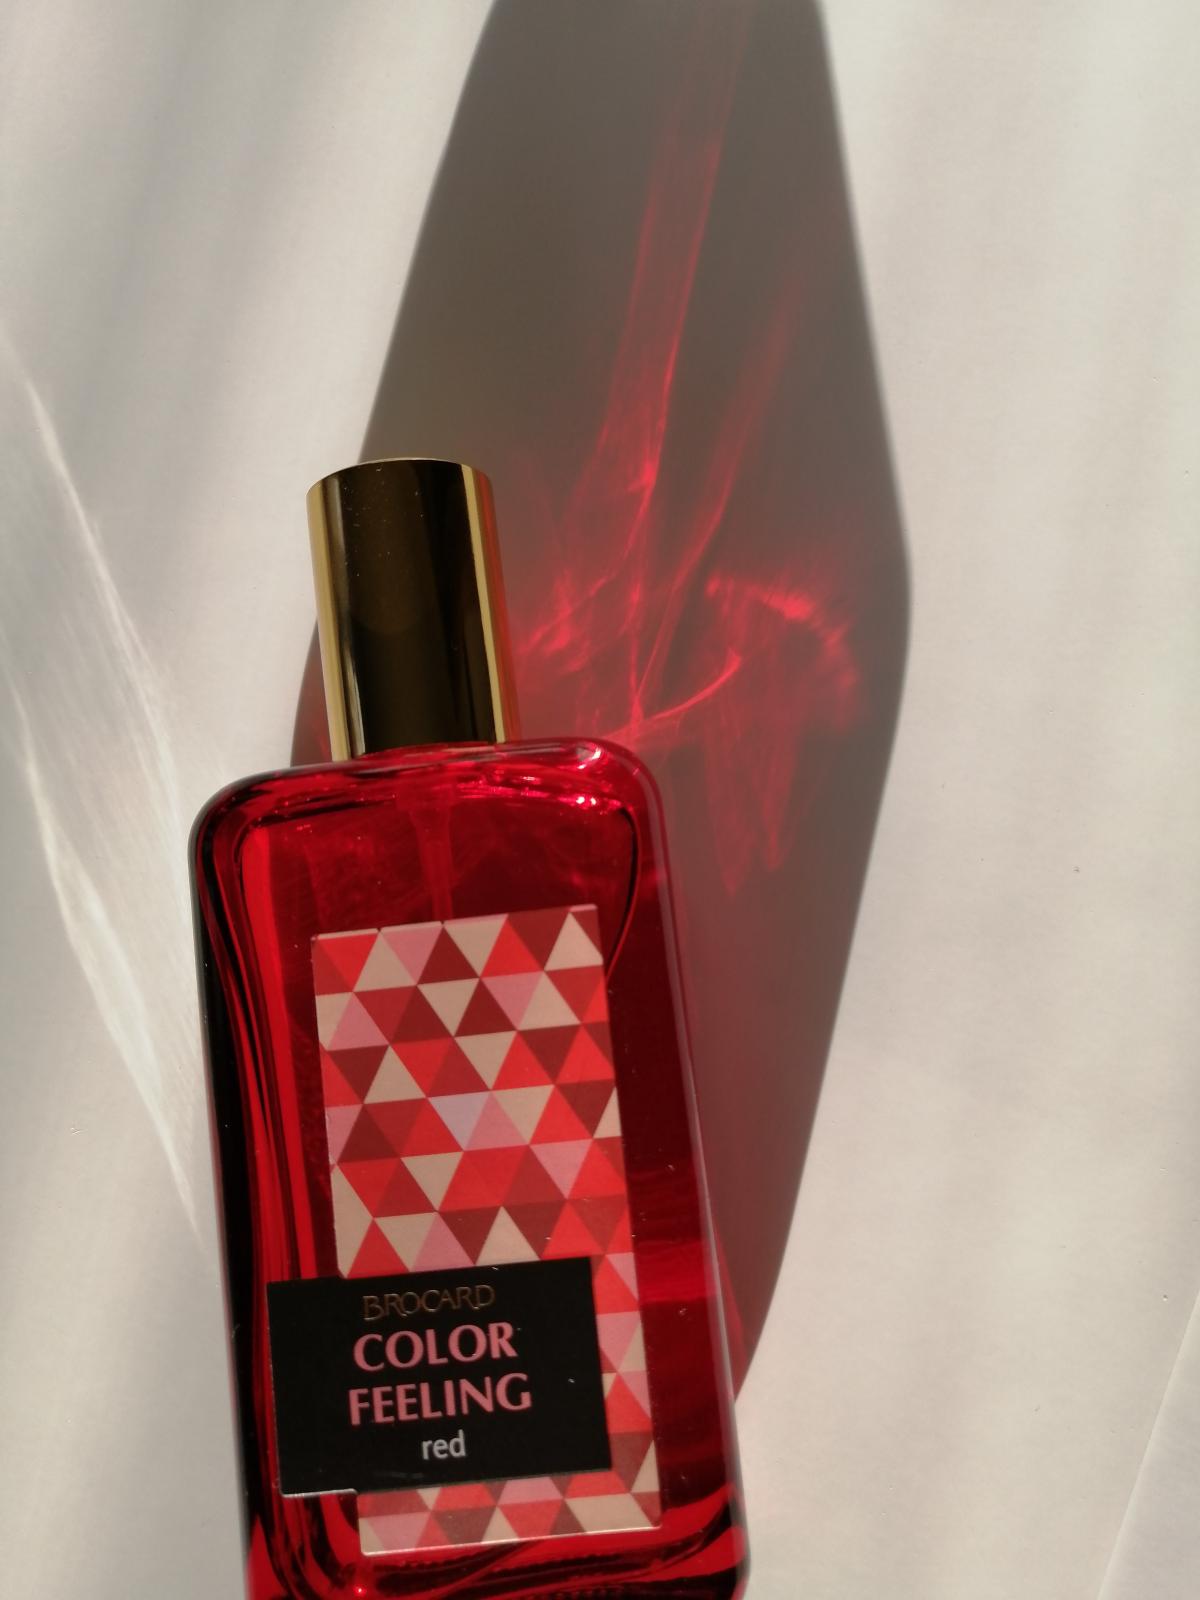 Color Feeling Red Brocard perfume - a fragrance for women and men 2020